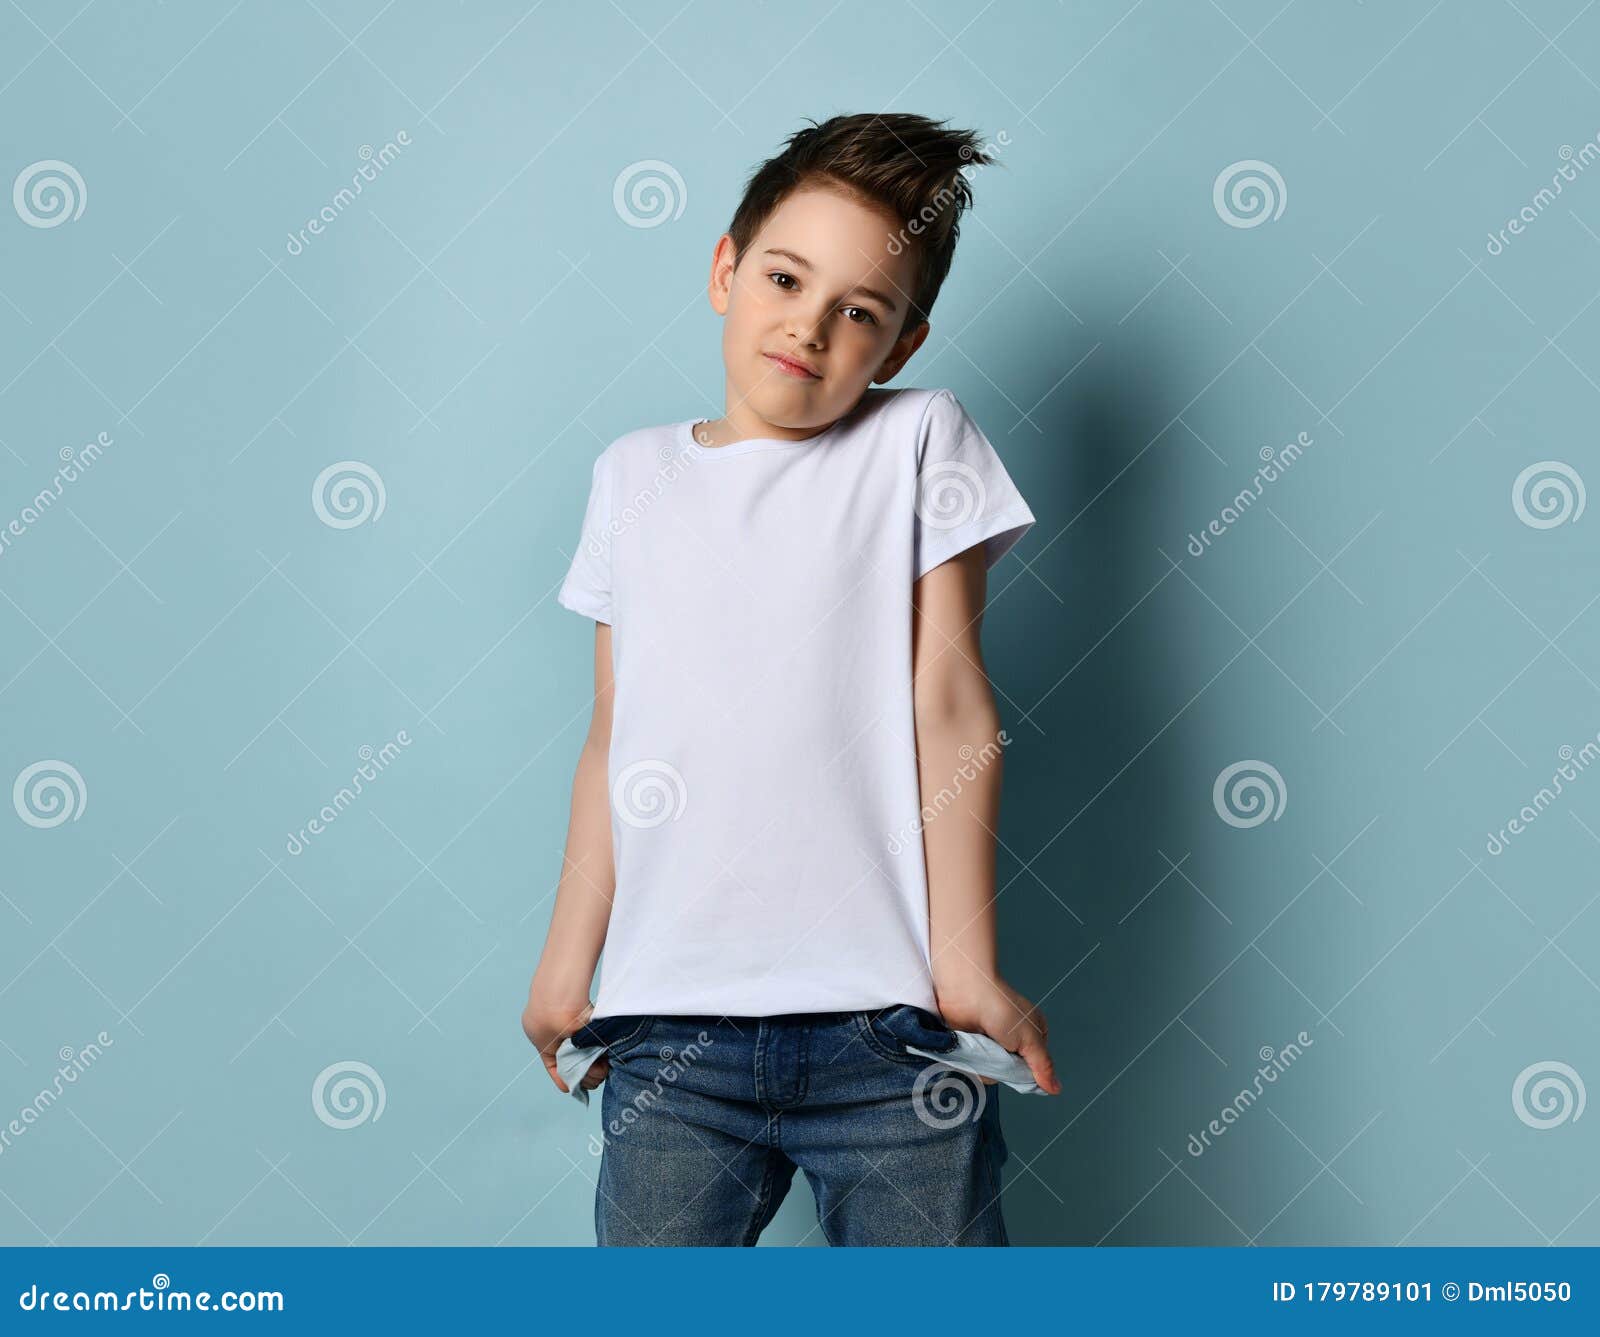 Small Cute Boy with Modern Hairstyle in White T-shirt Standing and Showing  Empty Pockets with No Money Concept Stock Image - Image of lost, lifestyle:  179789101